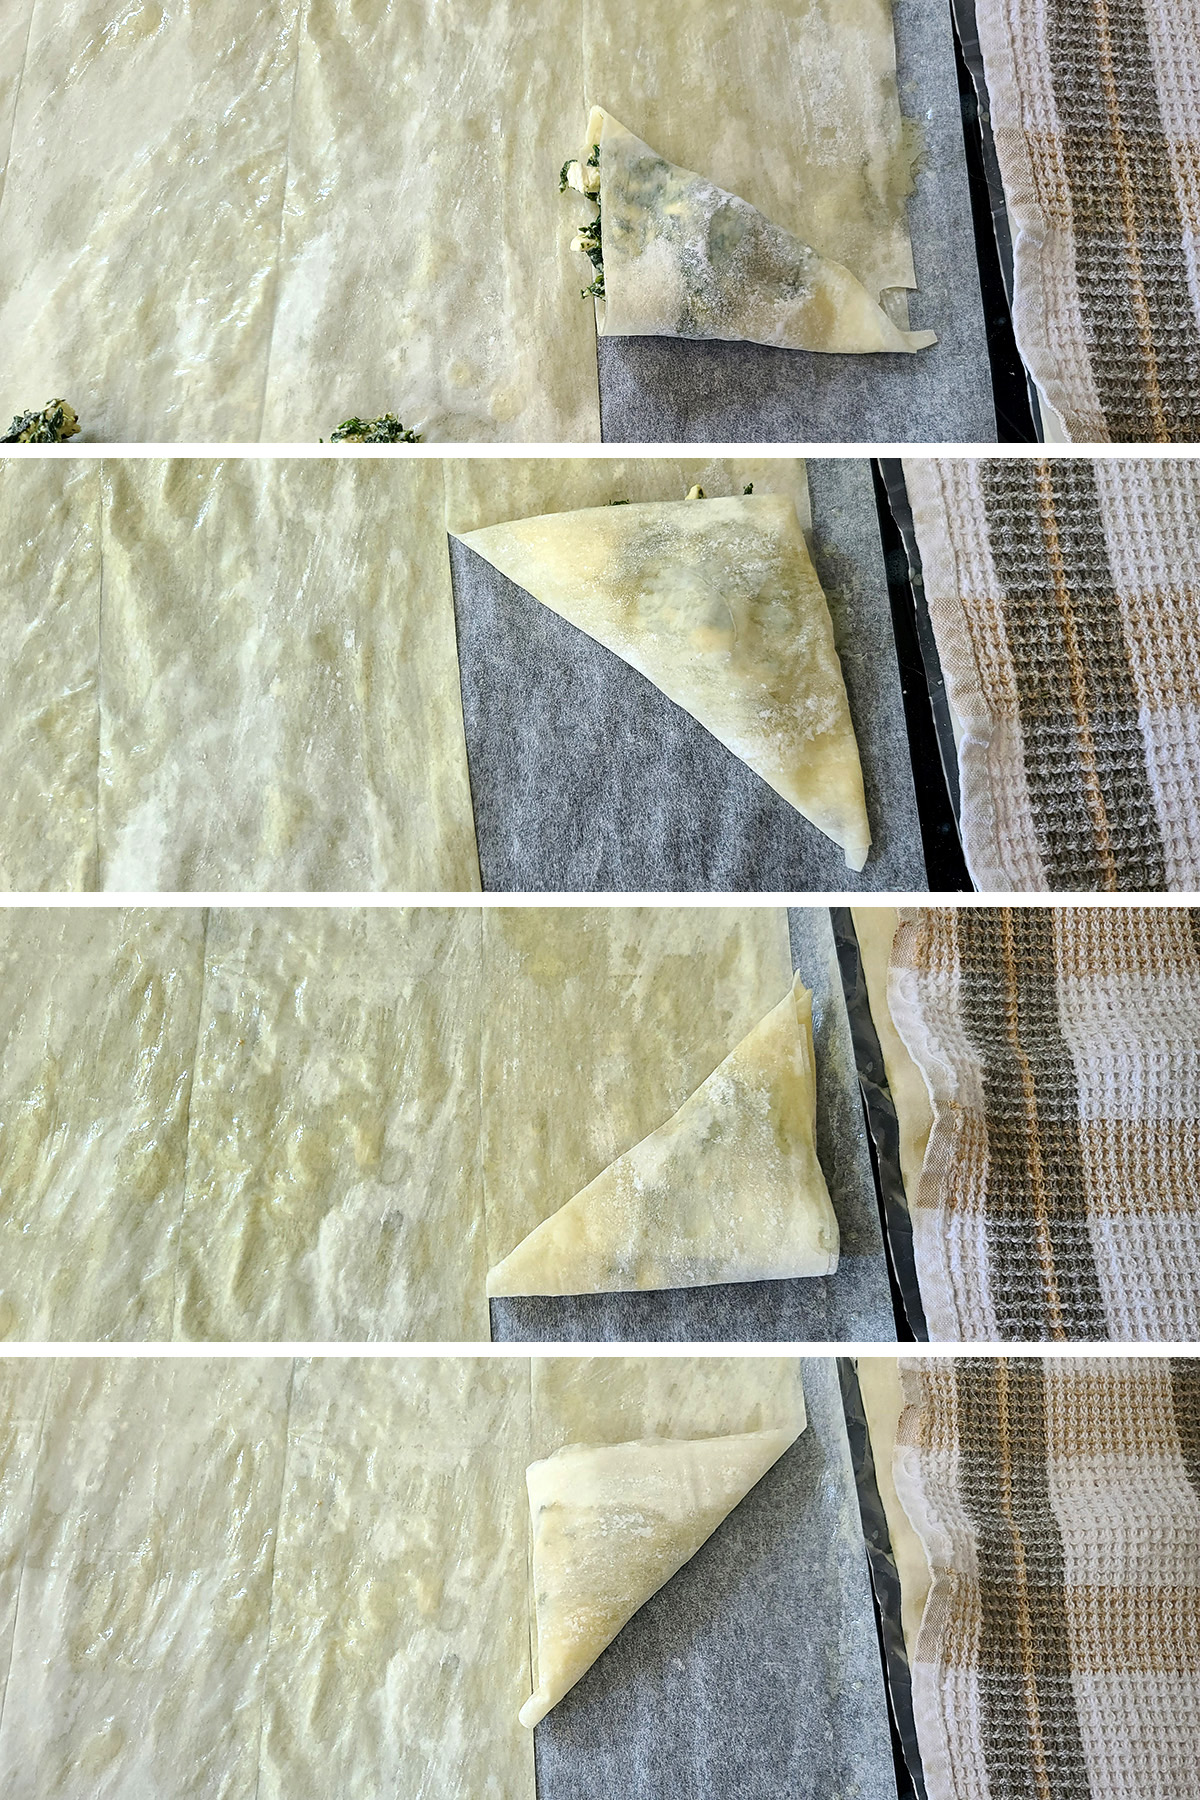 A 4 part progression image showing the triangle of phyllo being folded over itself 4 times, flag style.